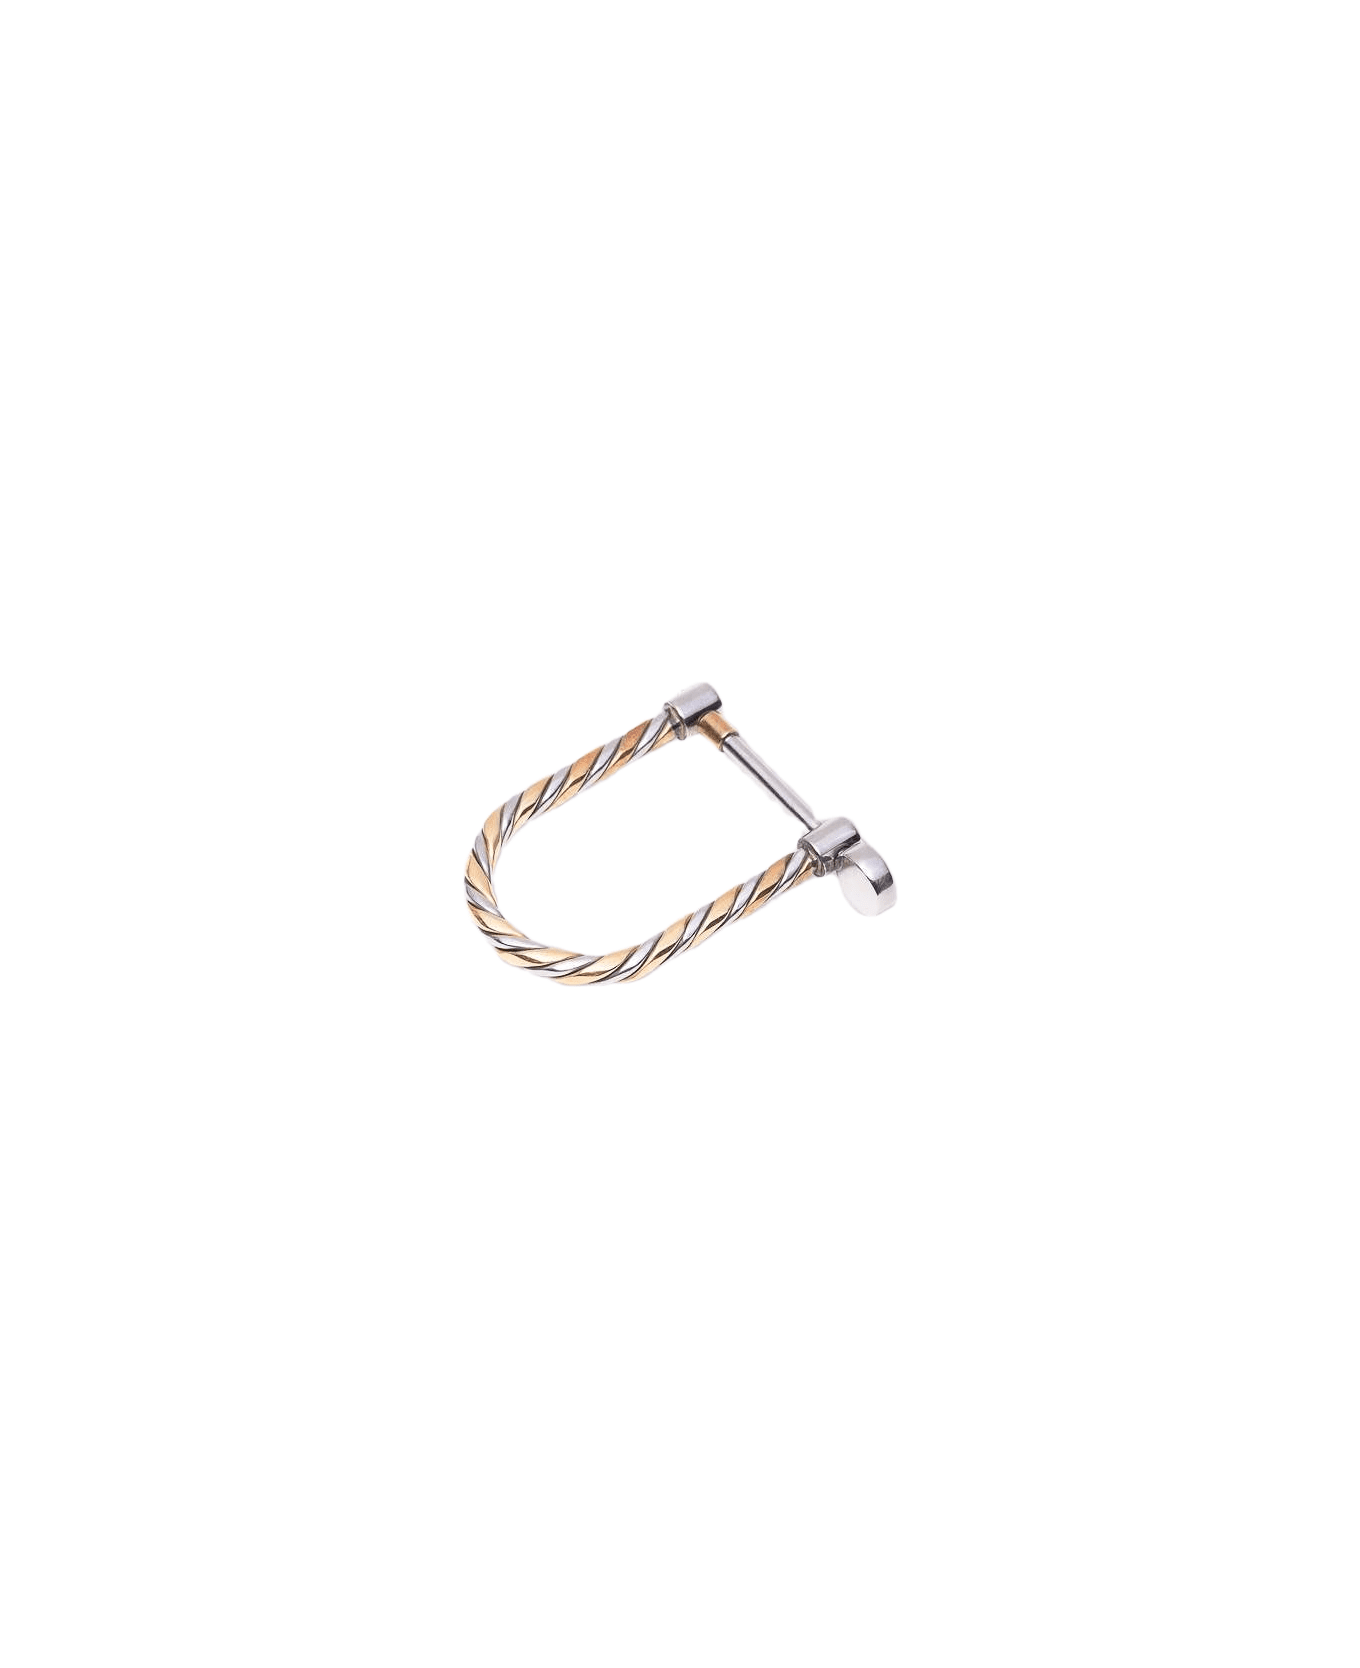 Larusmiani Stainless Steel And Yellow Gold Shackle Shaped Key Holder Keyring - Neutral